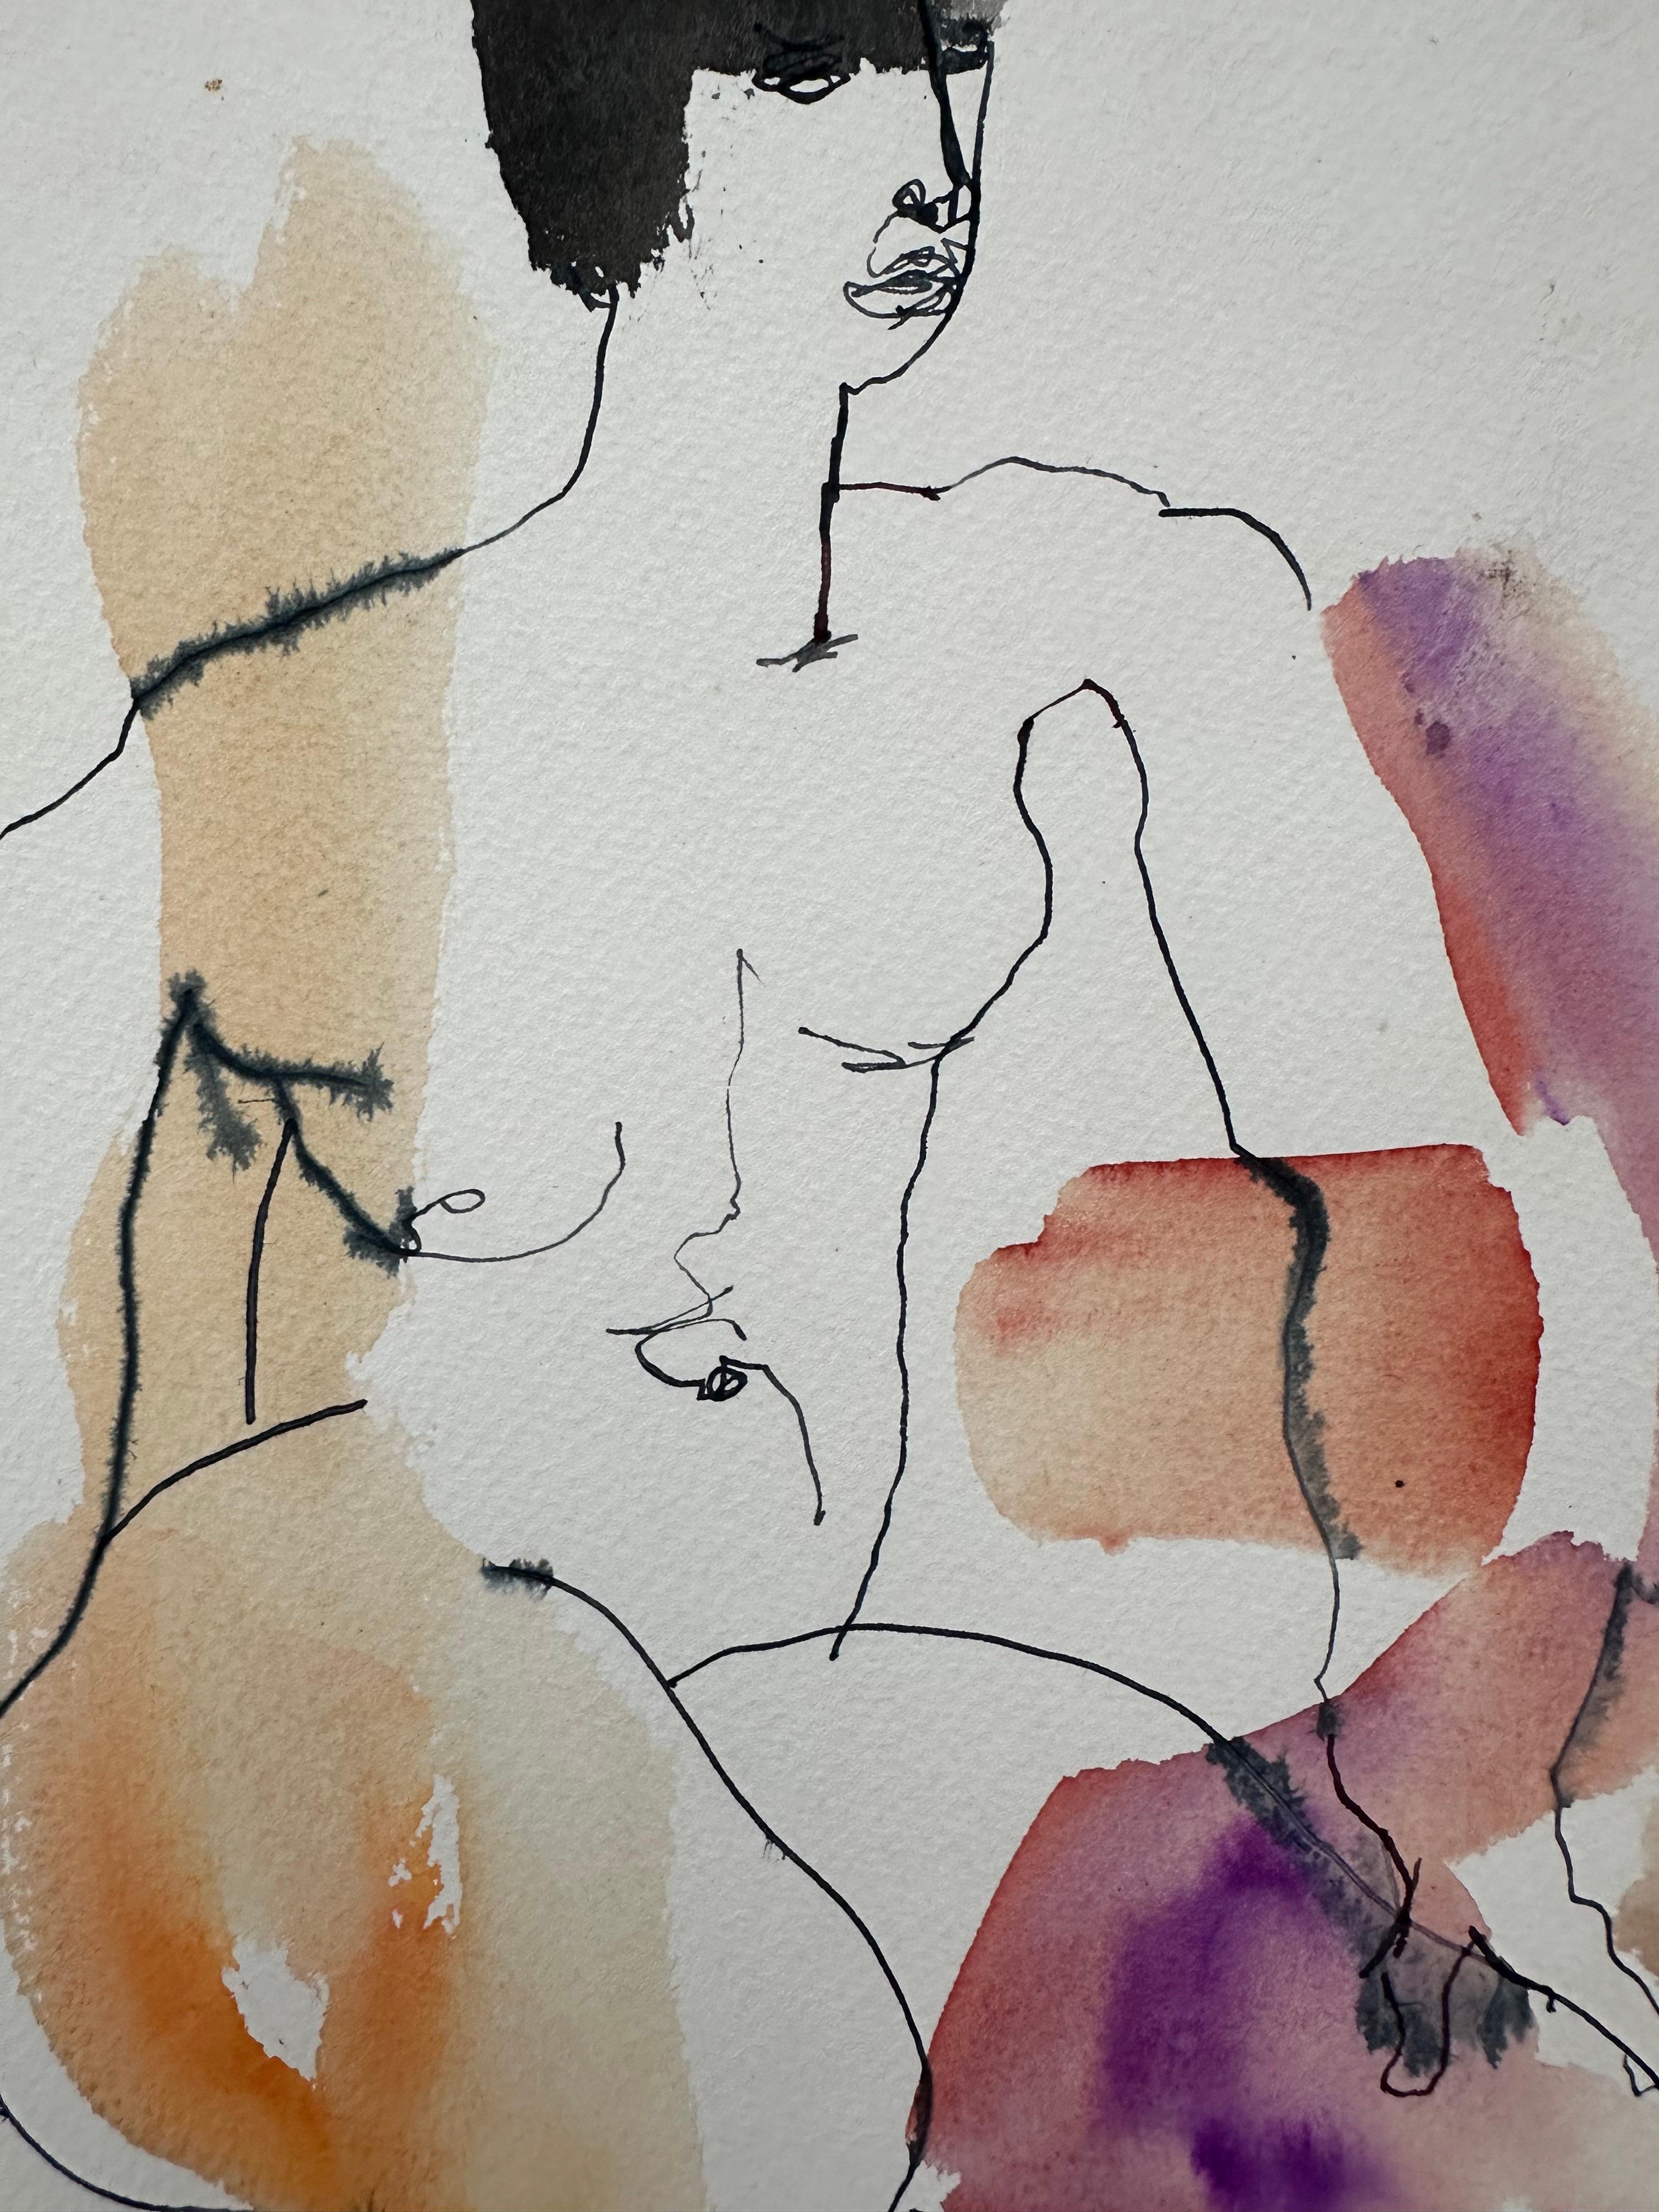 Joseph Kardonne (1911-1985). Nude Woman, 1967. Watercolor on paper, sheet measures 11 x 14 inches.  Signed, dated and titled lower right. Excellent condition.

Born in Newark, New Jersey in 1911, Joe Kardonne first showed an interest in art at an